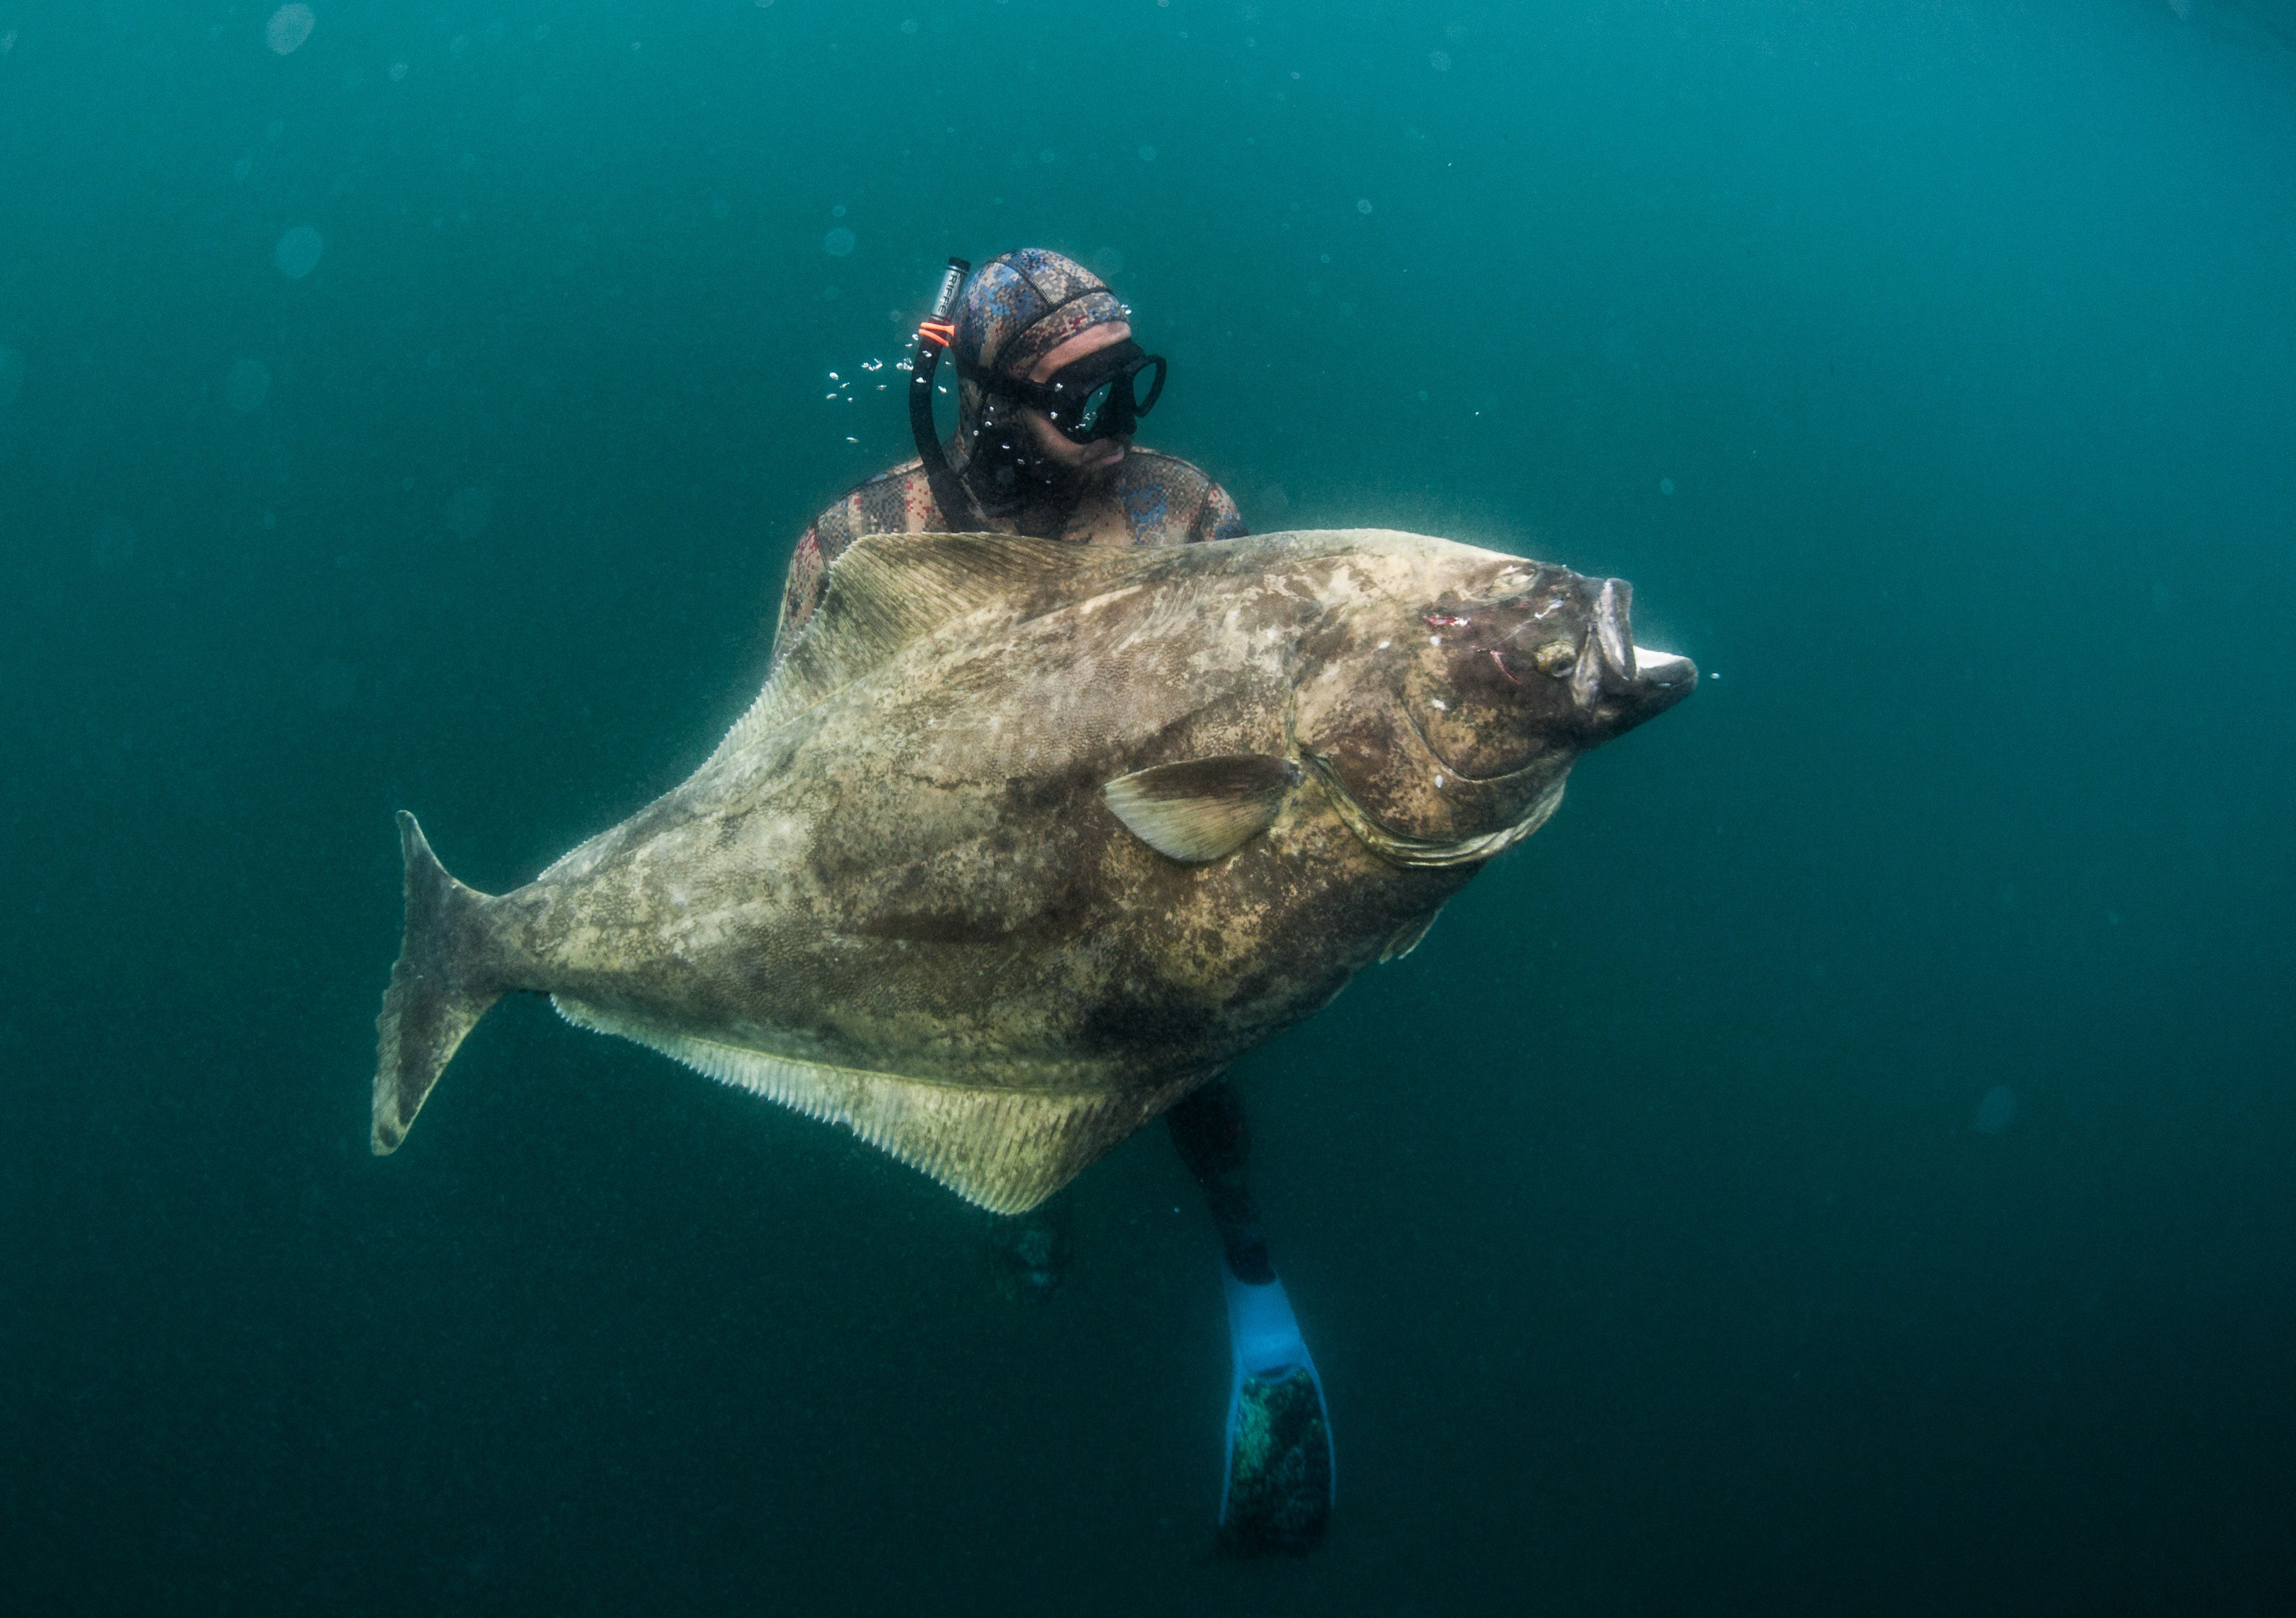 Spearfishing halibut world record smashed by Florida man in Homer